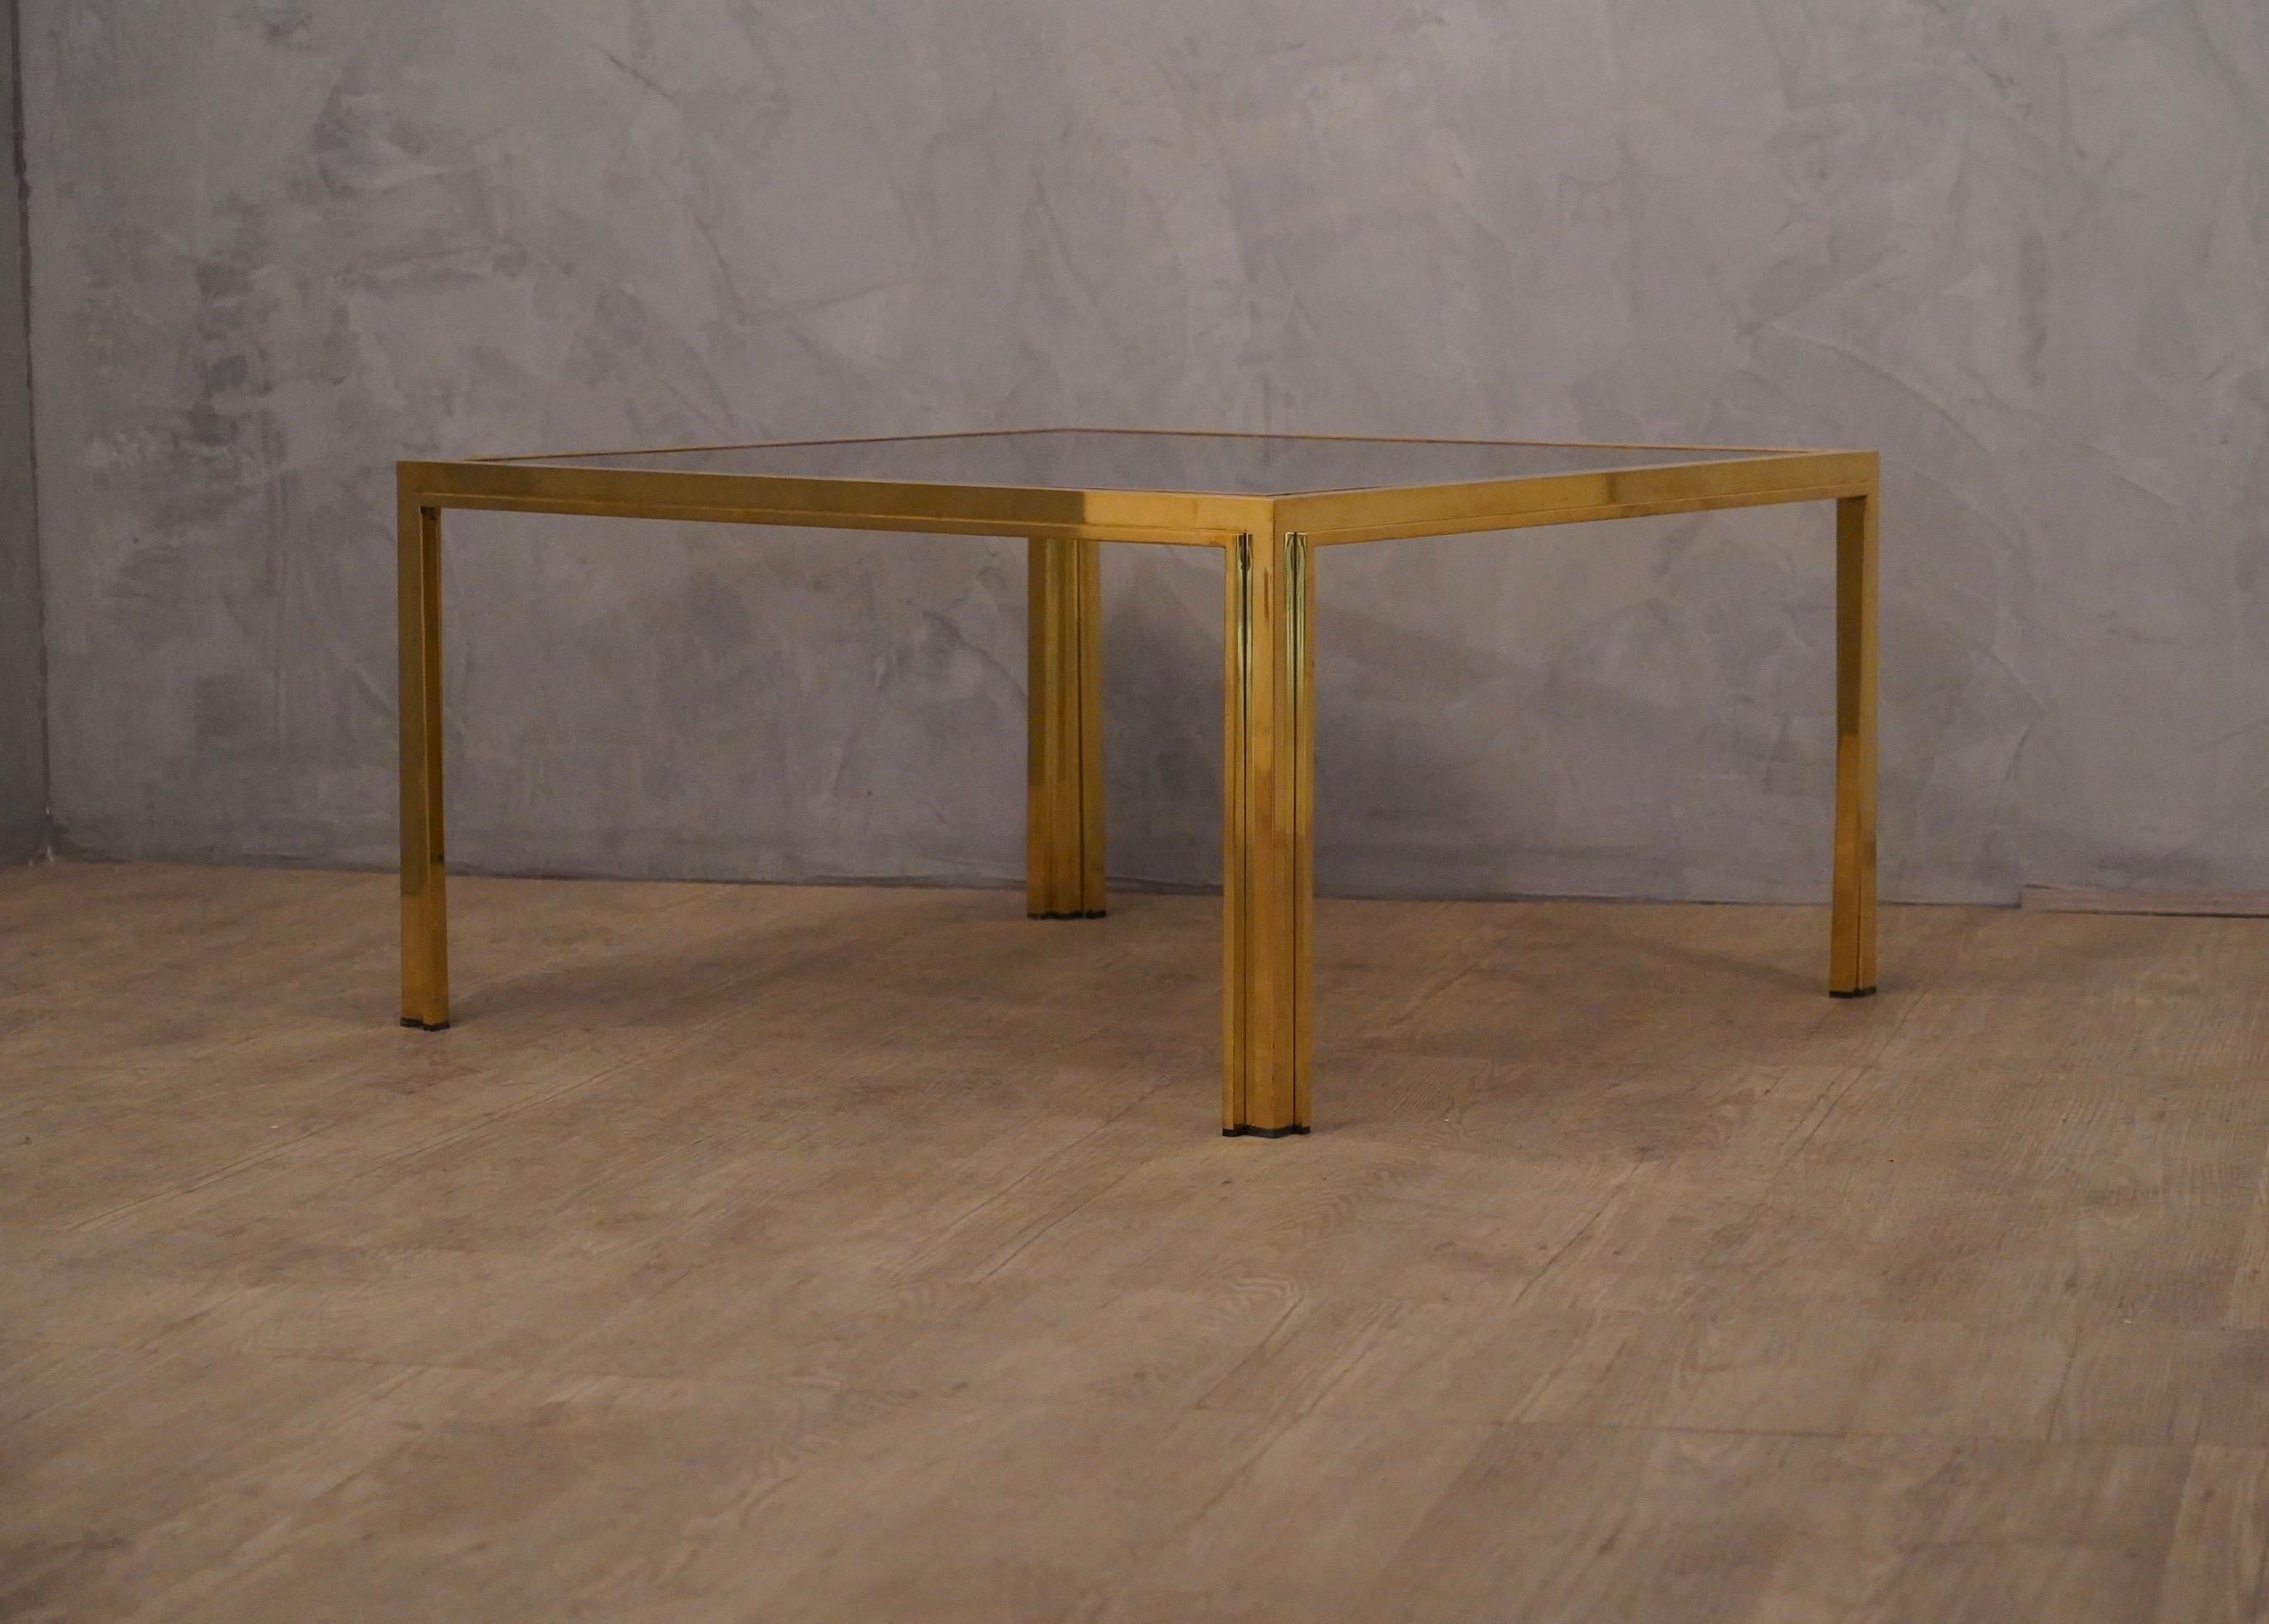 Romeo Rega Midcentury Square Brass and Glass Sofa Table, 1970 For Sale 2